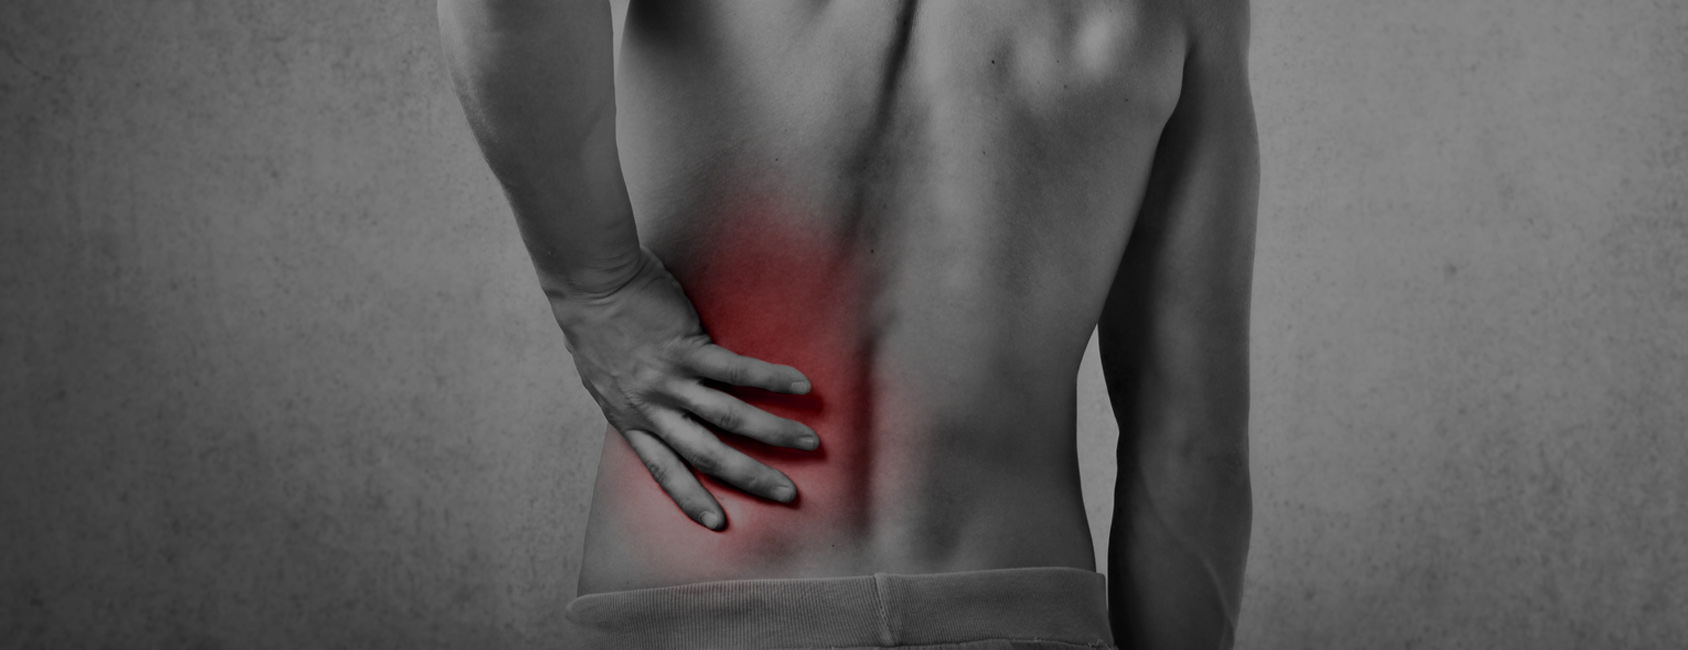 31 million Americans experience low-back pain.